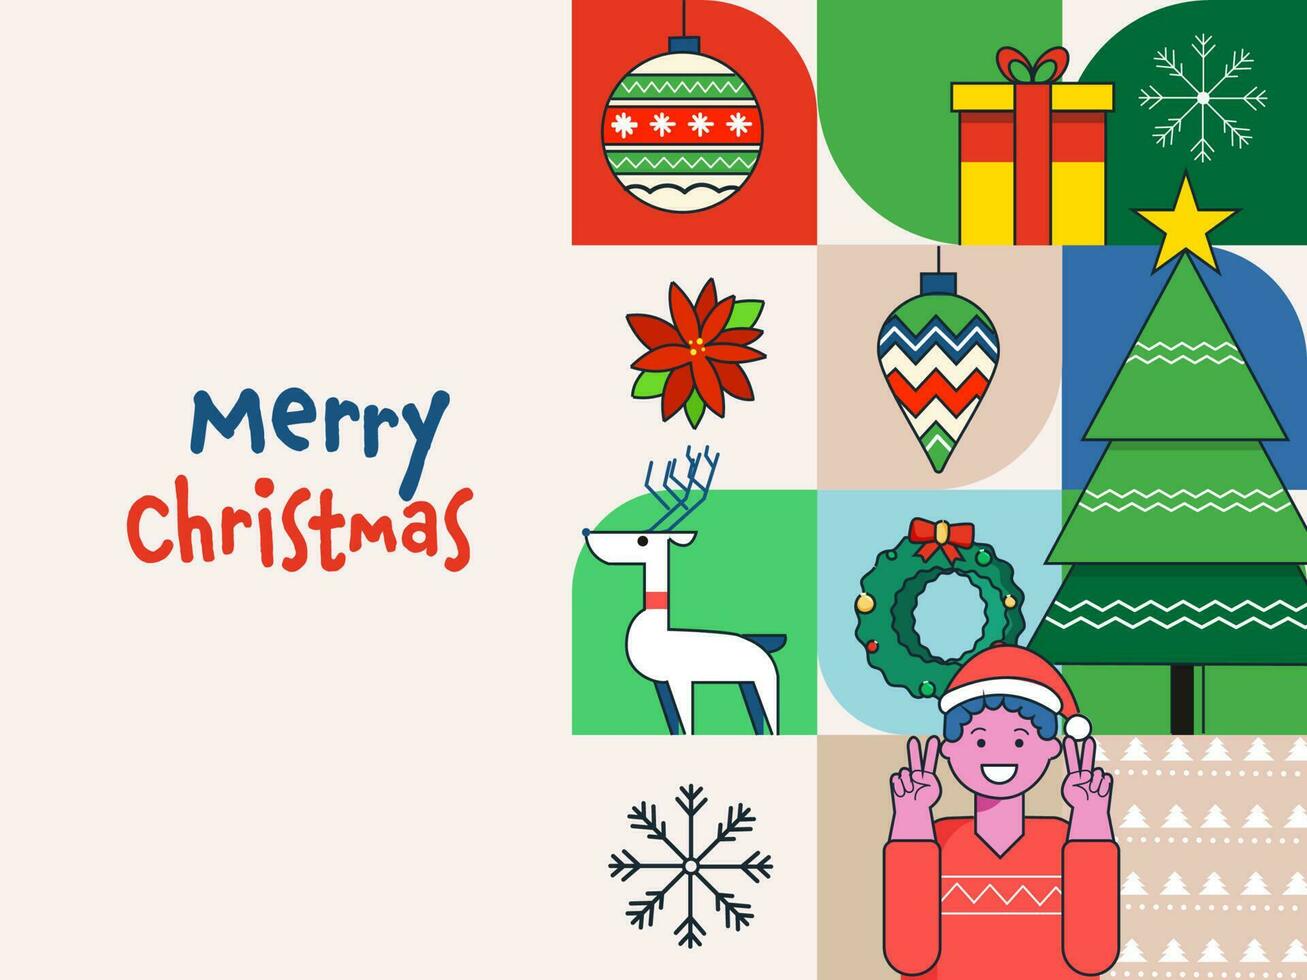 Merry Christmas Celebration Background With Festival Elements And Cheerful Young Boy Showing Peace Symbol. vector